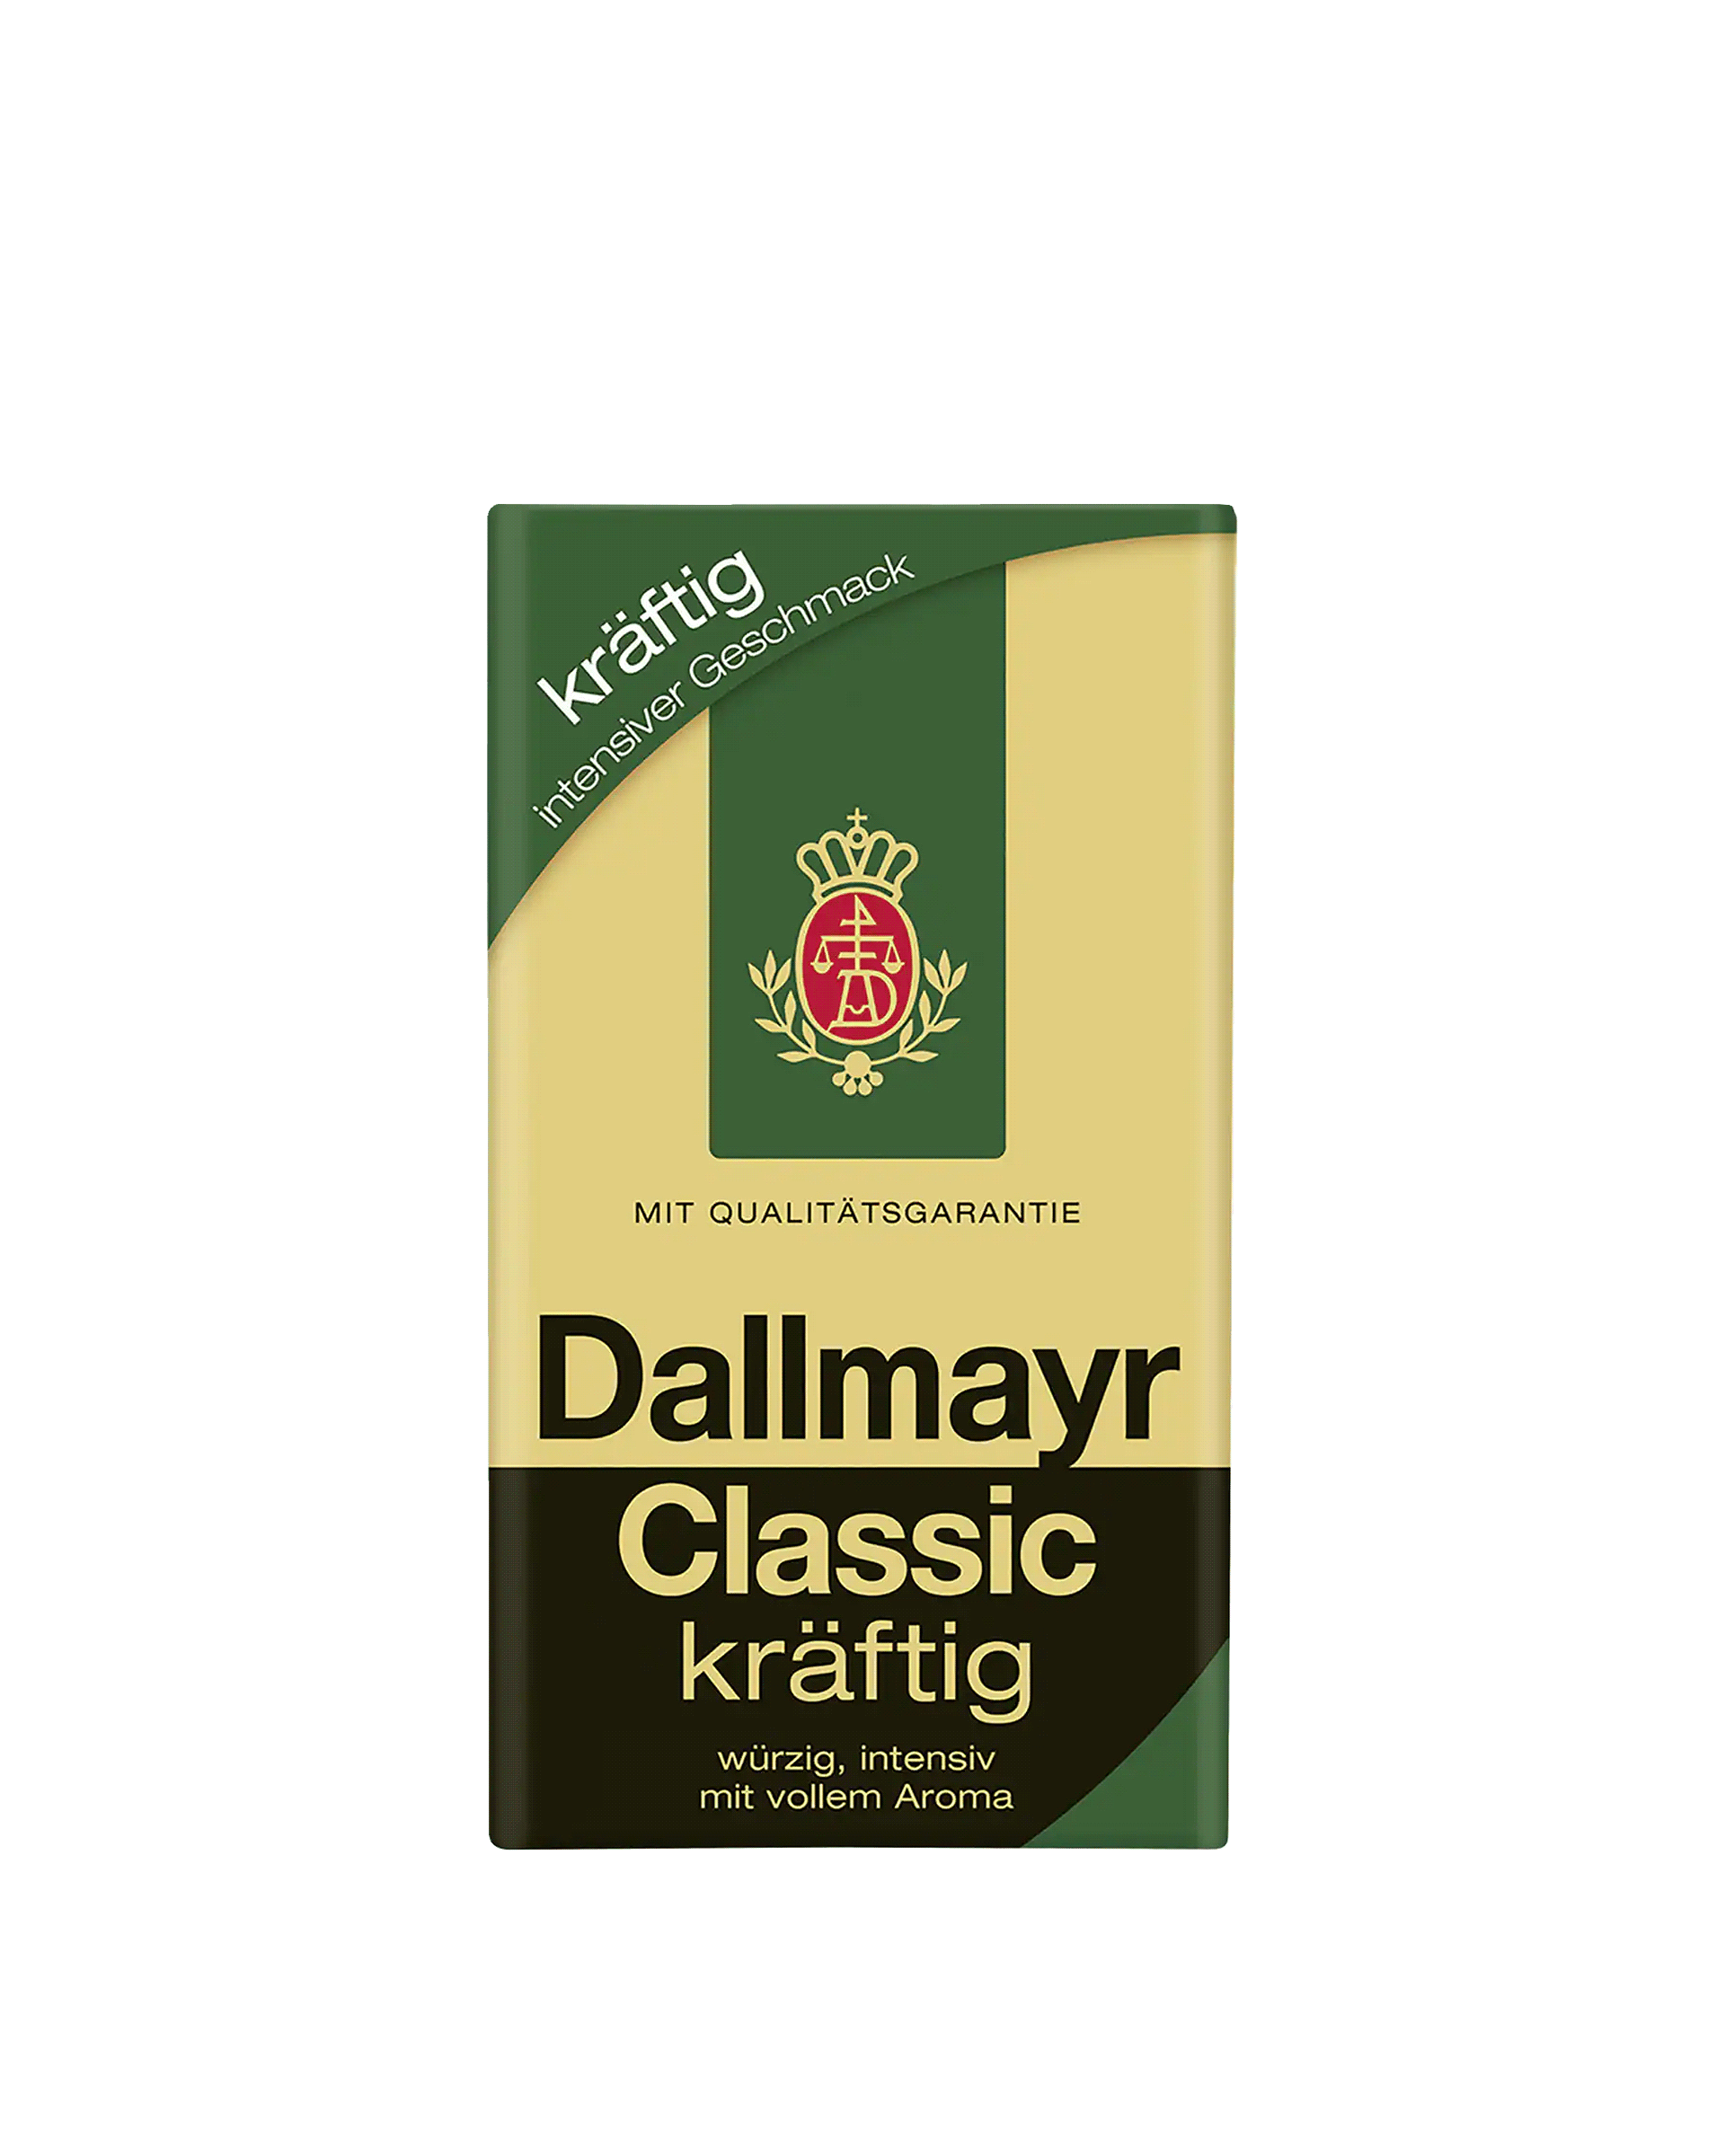 Dallmayr Ground Coffee classic strong Peppery – Spot full 500g aroma